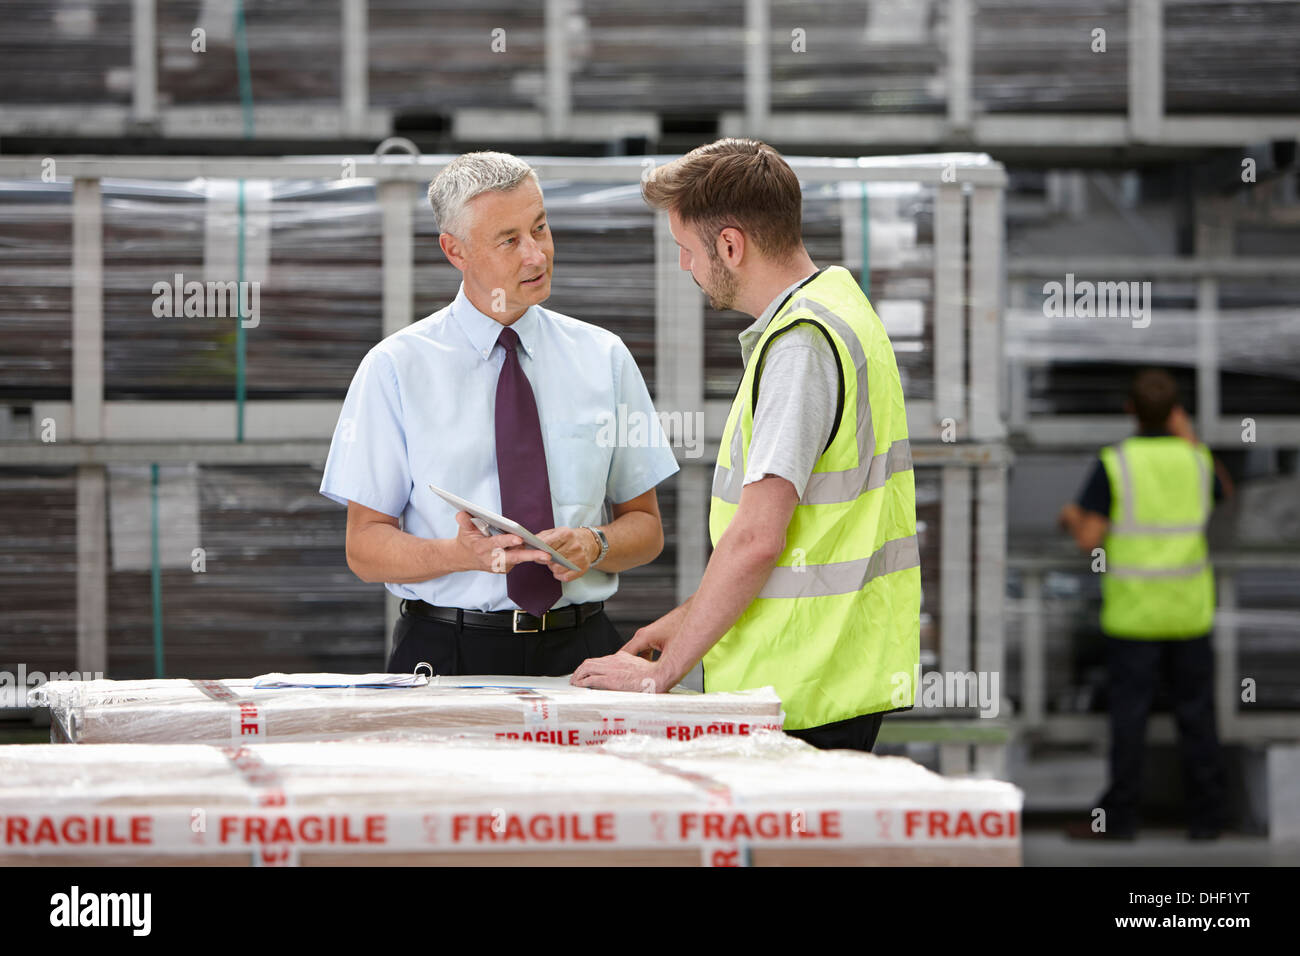 Warehouse worker and manager discussing order in engineering warehouse Stock Photo